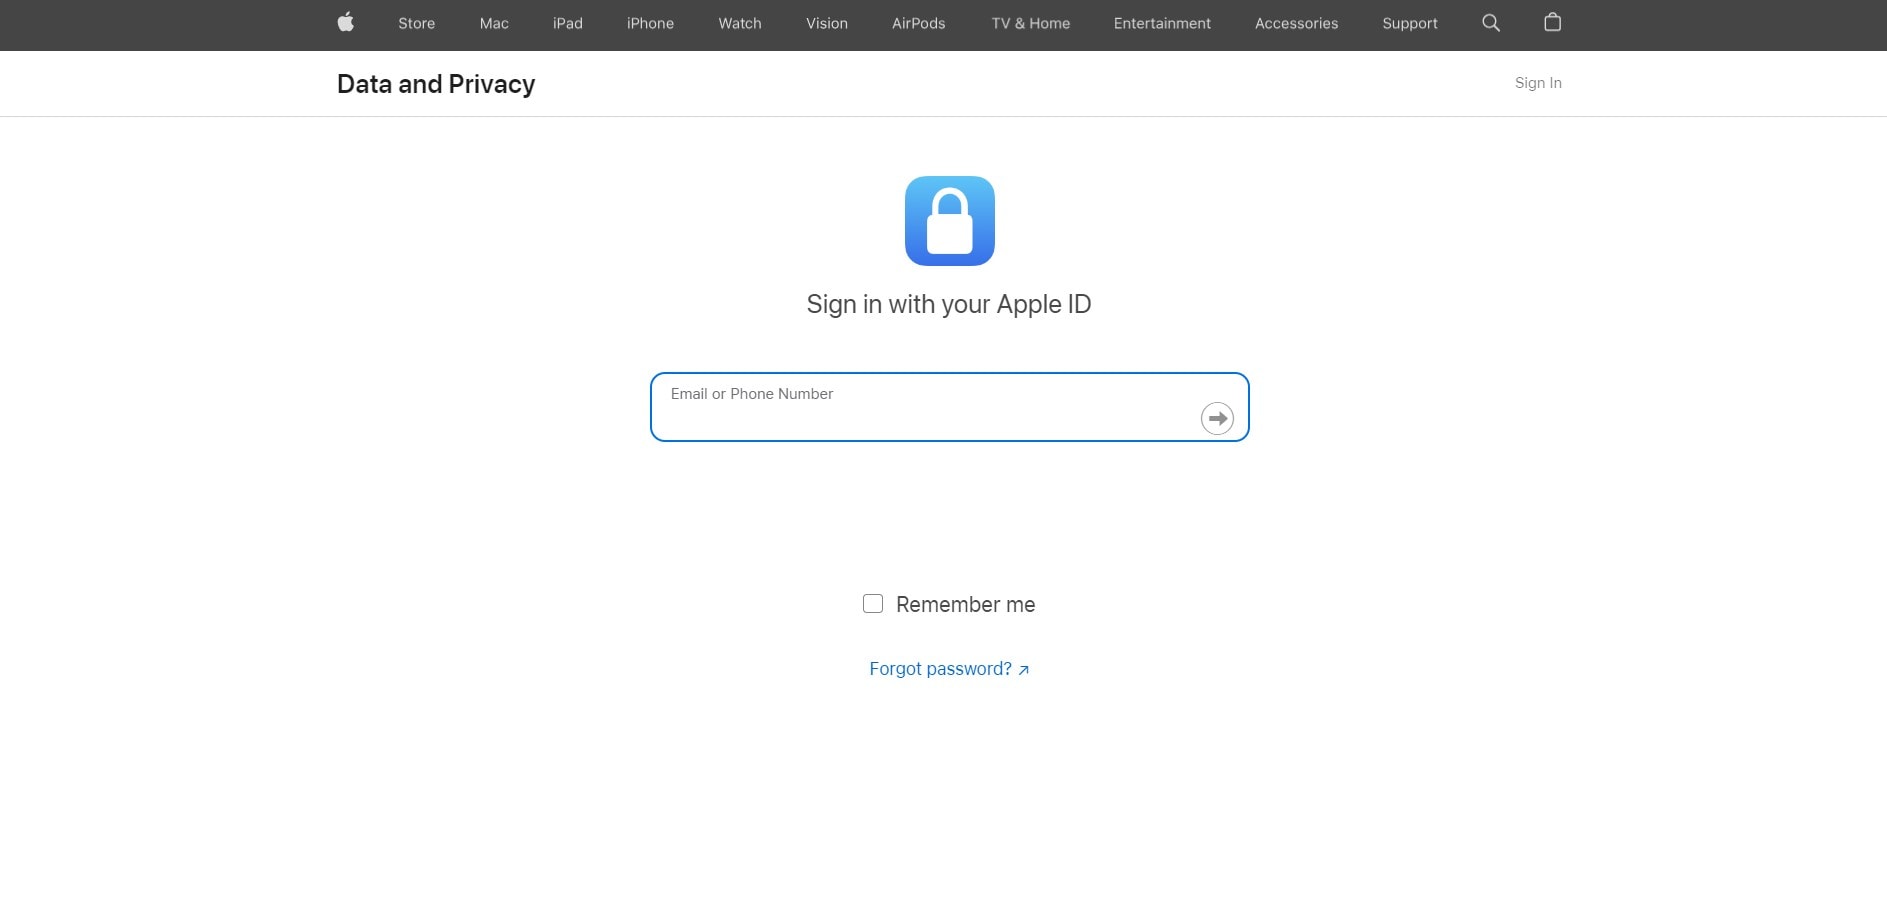 apple data and privacy website interface